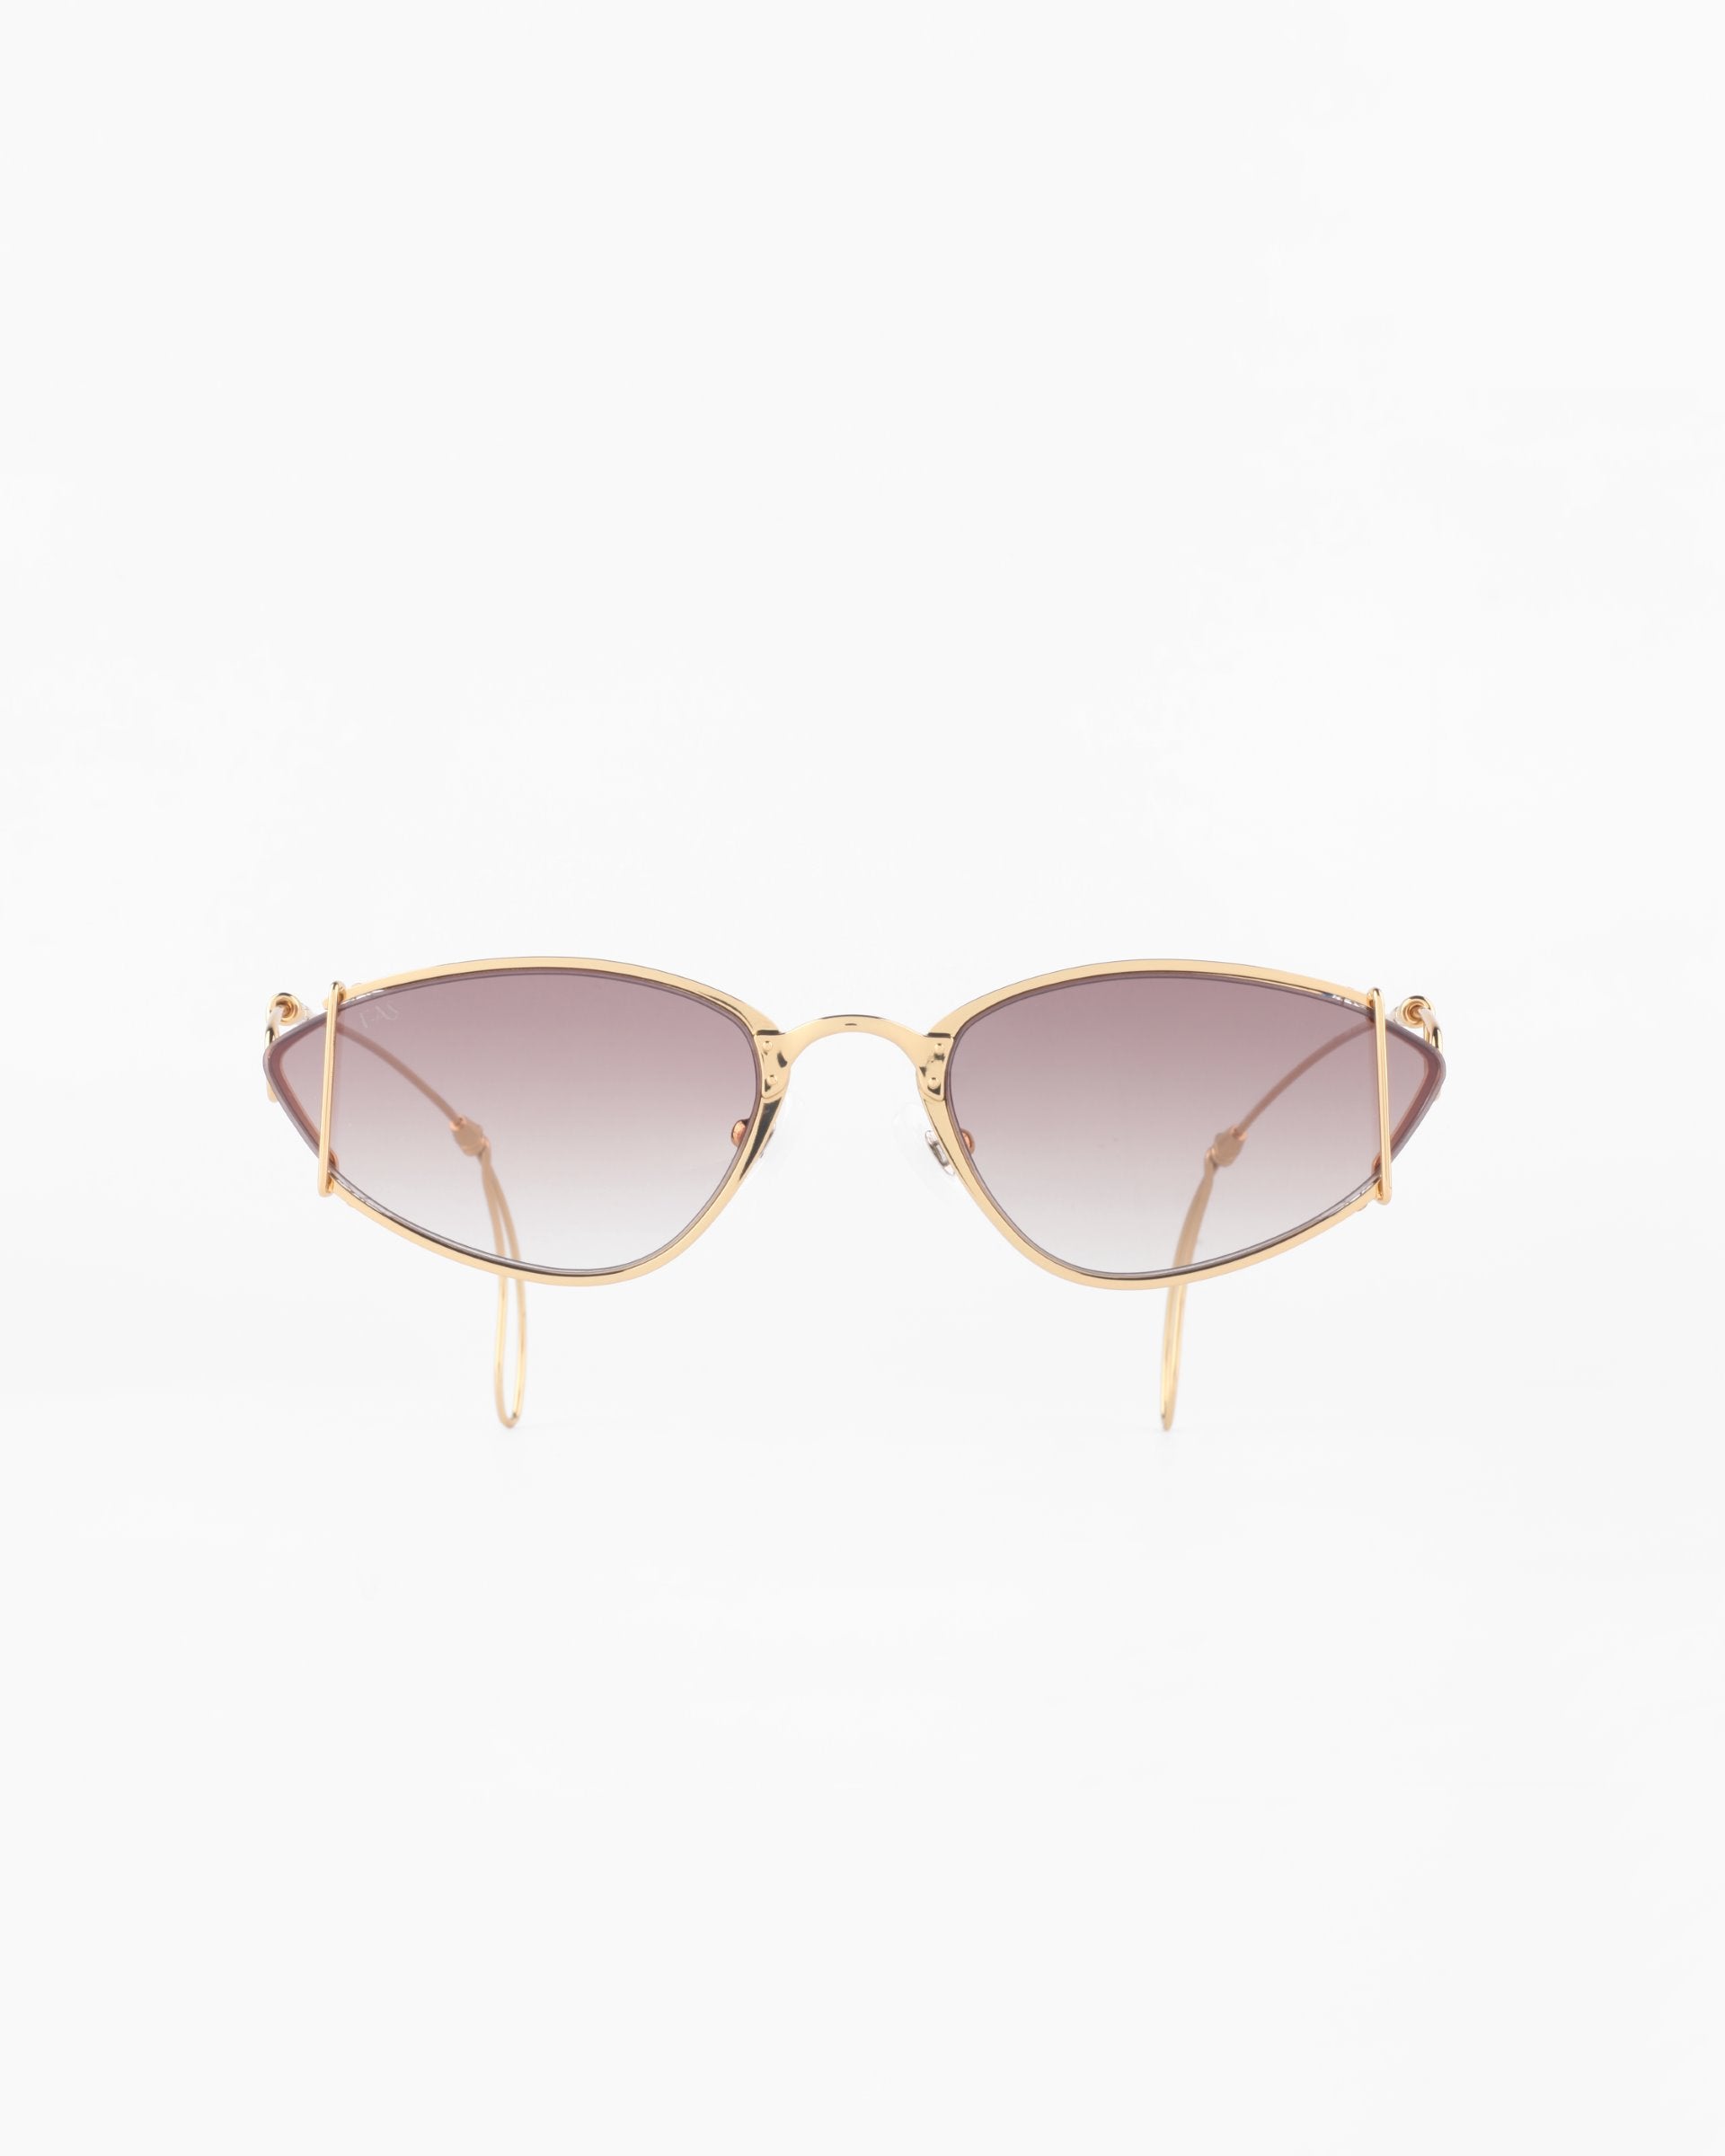 A pair of stylish, 18-karat gold-plated sunglasses with brown-tinted lenses. The Ornate by For Art's Sake® sunglasses have a sleek, modern design and feature thin wire temples. They offer 100% UVA & UVB protection and are set against a plain, white background.